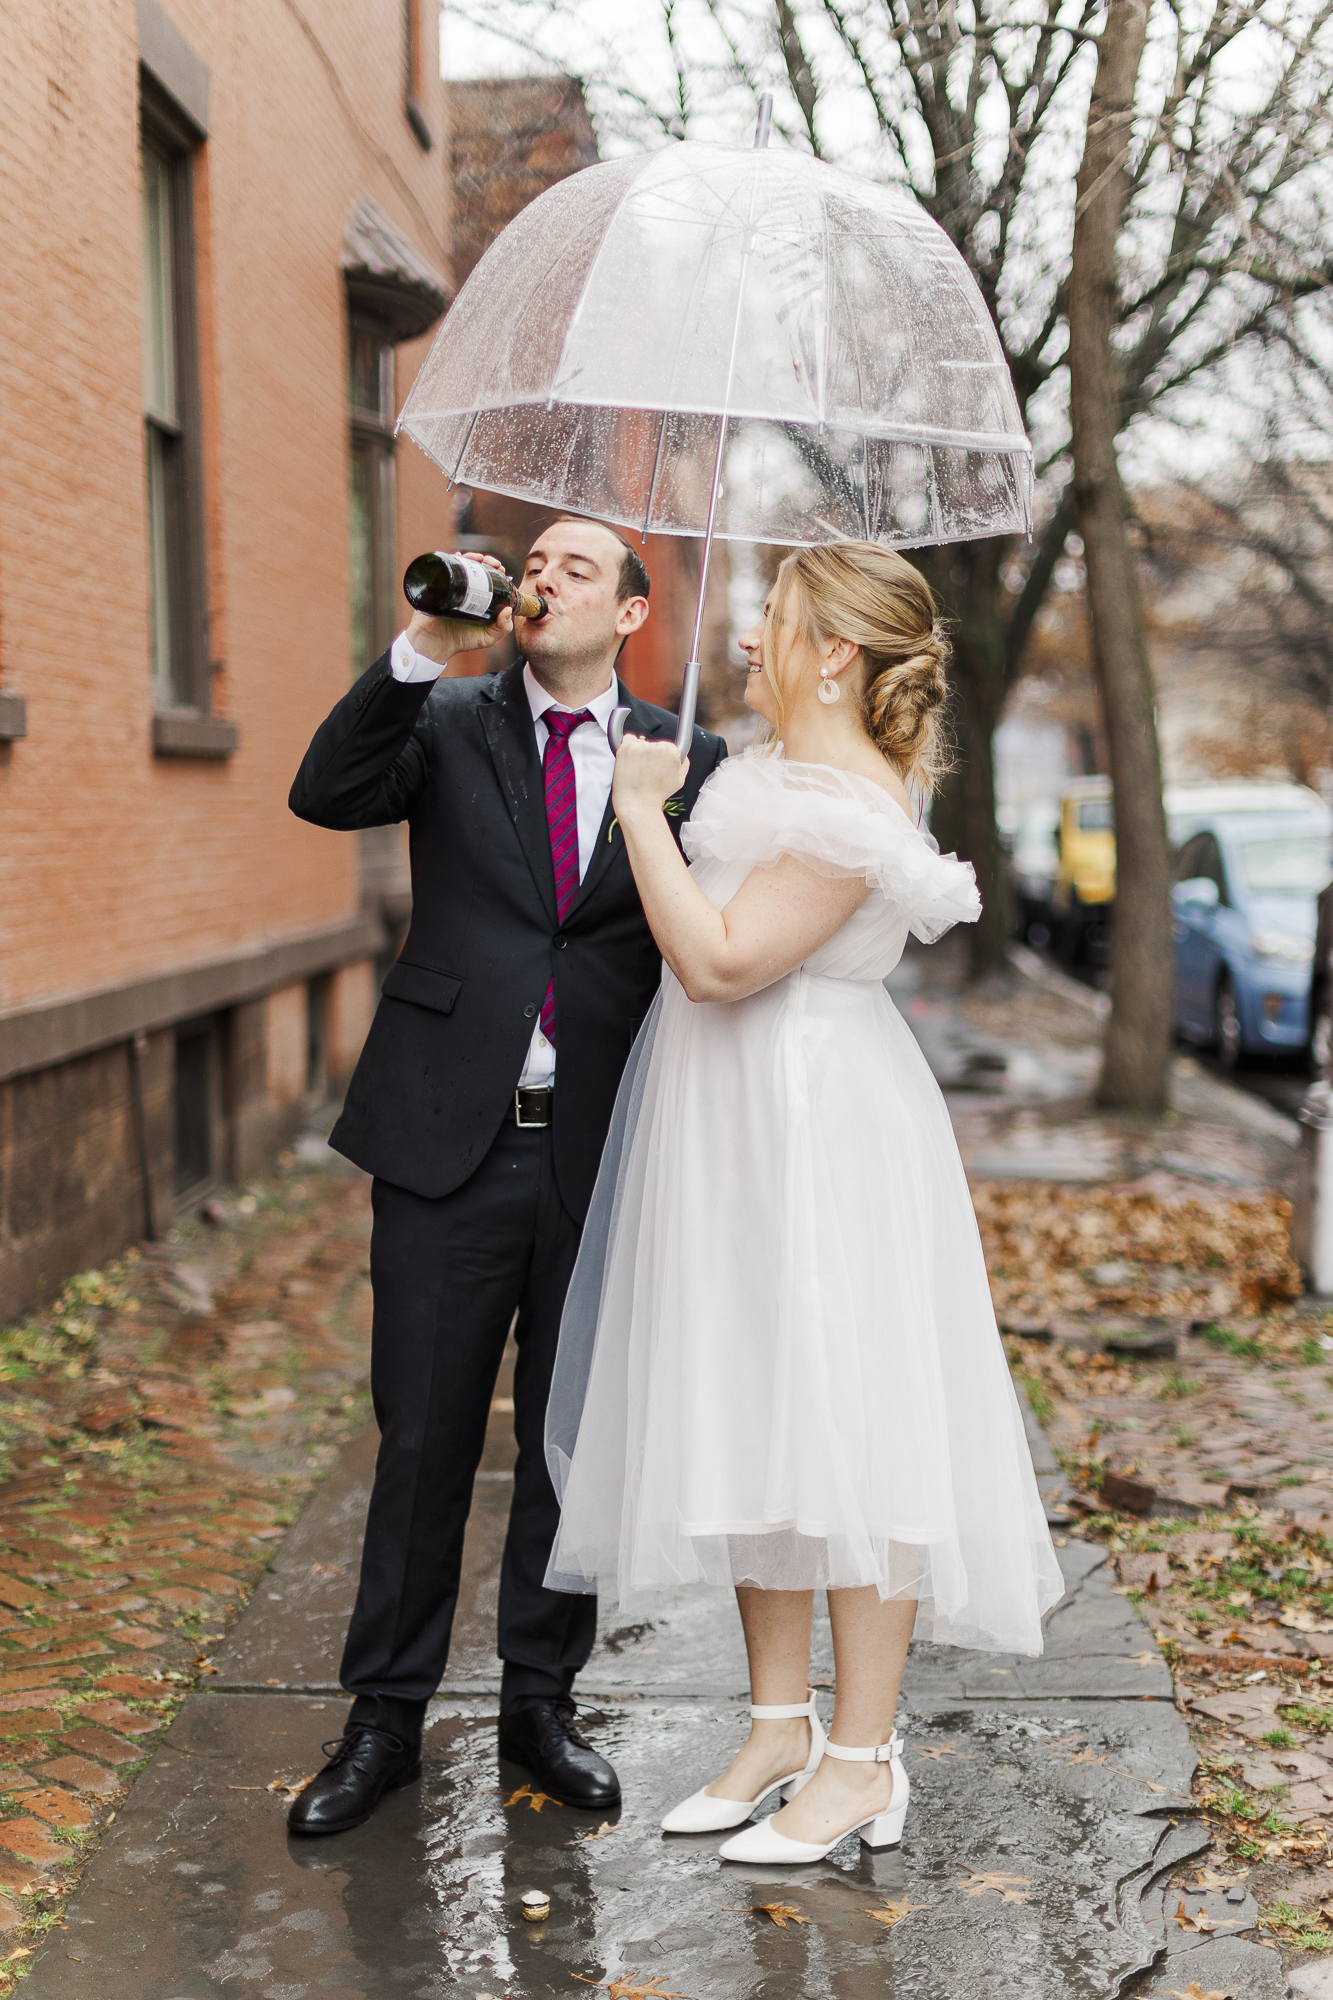 5 Tips for a Foolproof Fall Wedding in the Hudson Valley